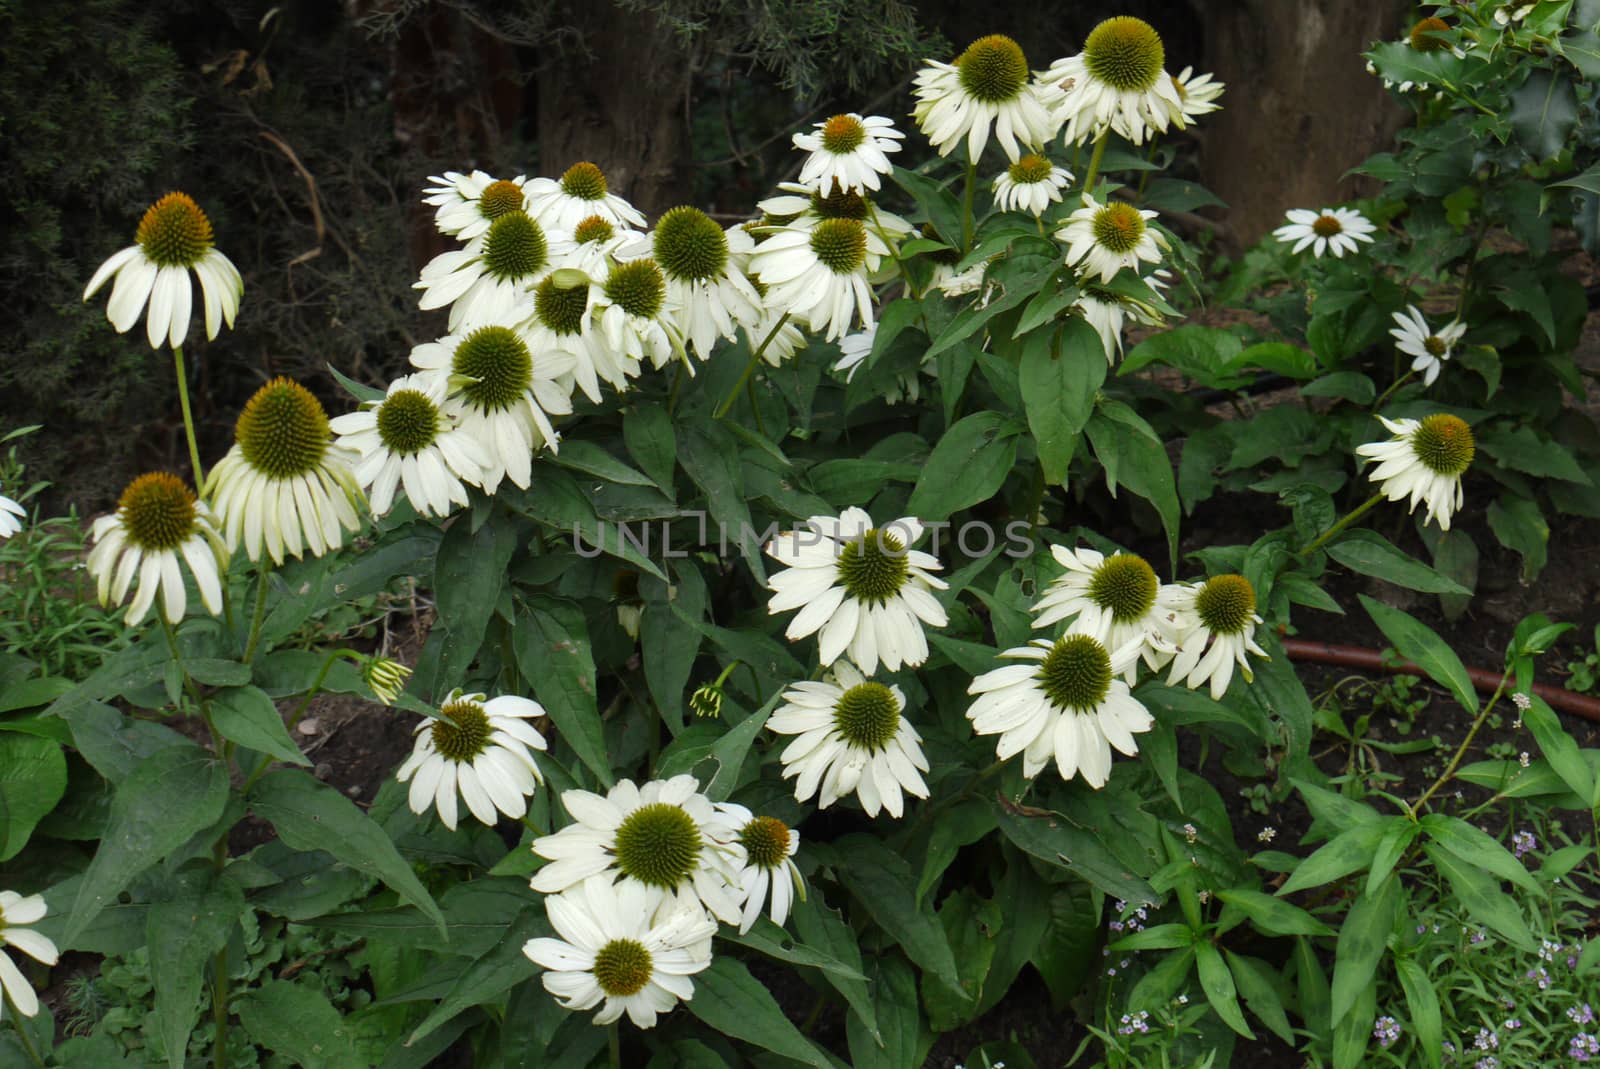 White flowers with large yellow centers in the form of a ball